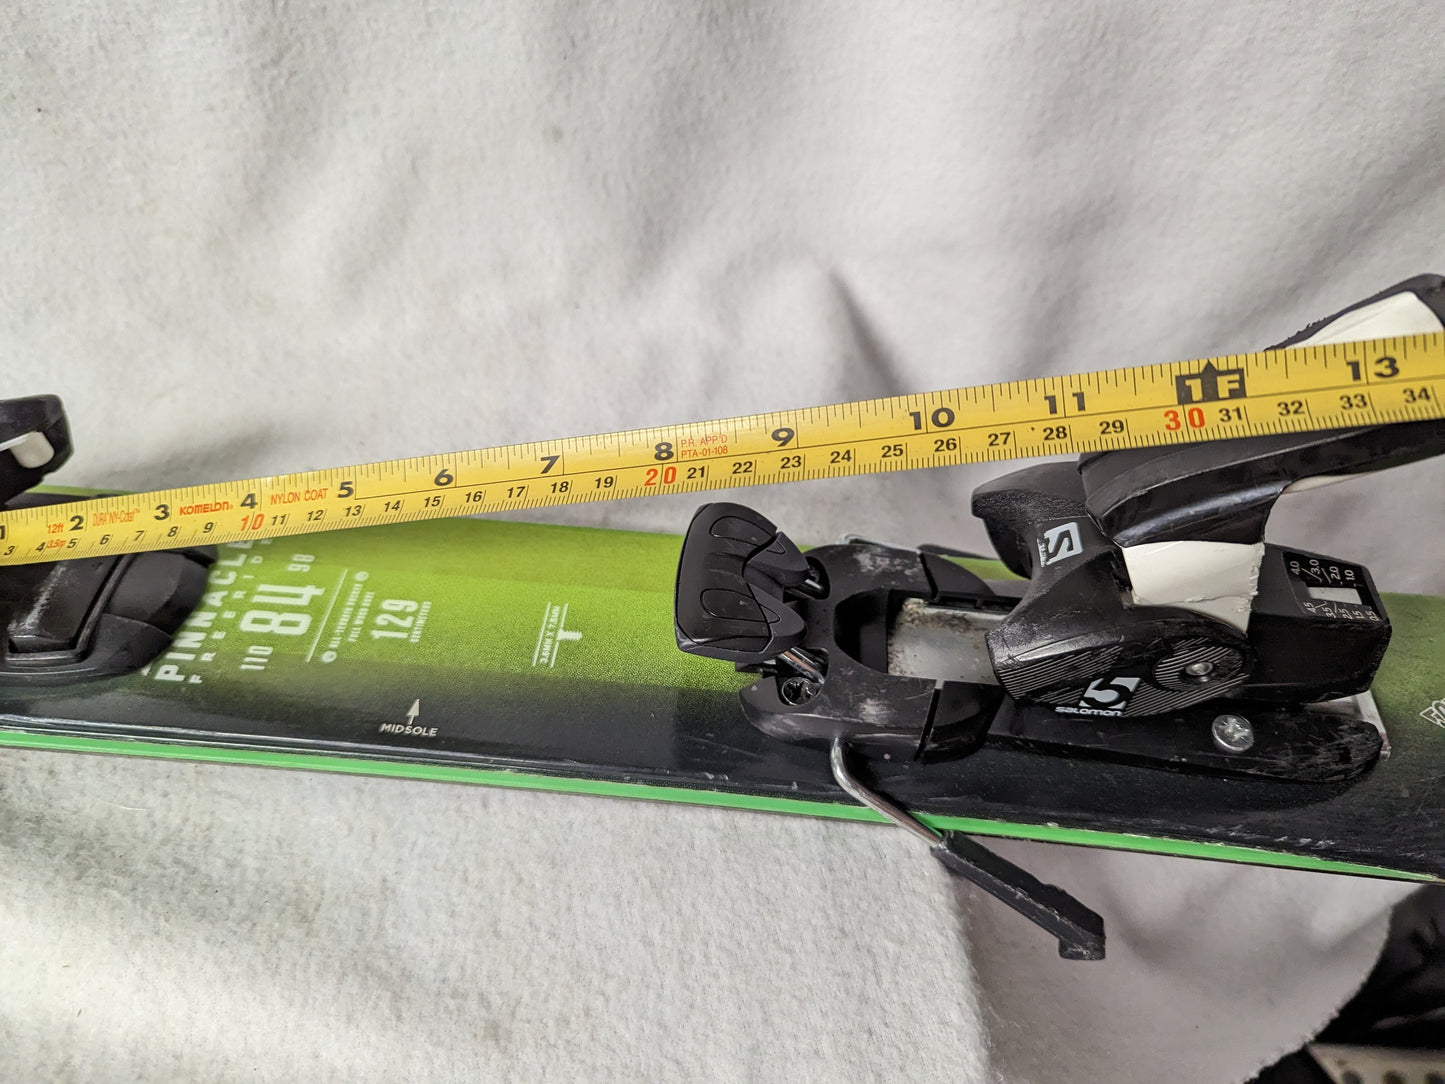 K2 Pinnacle 84 Skis w/Salomon Bindings Size 129 Cm Color Green Condition Used